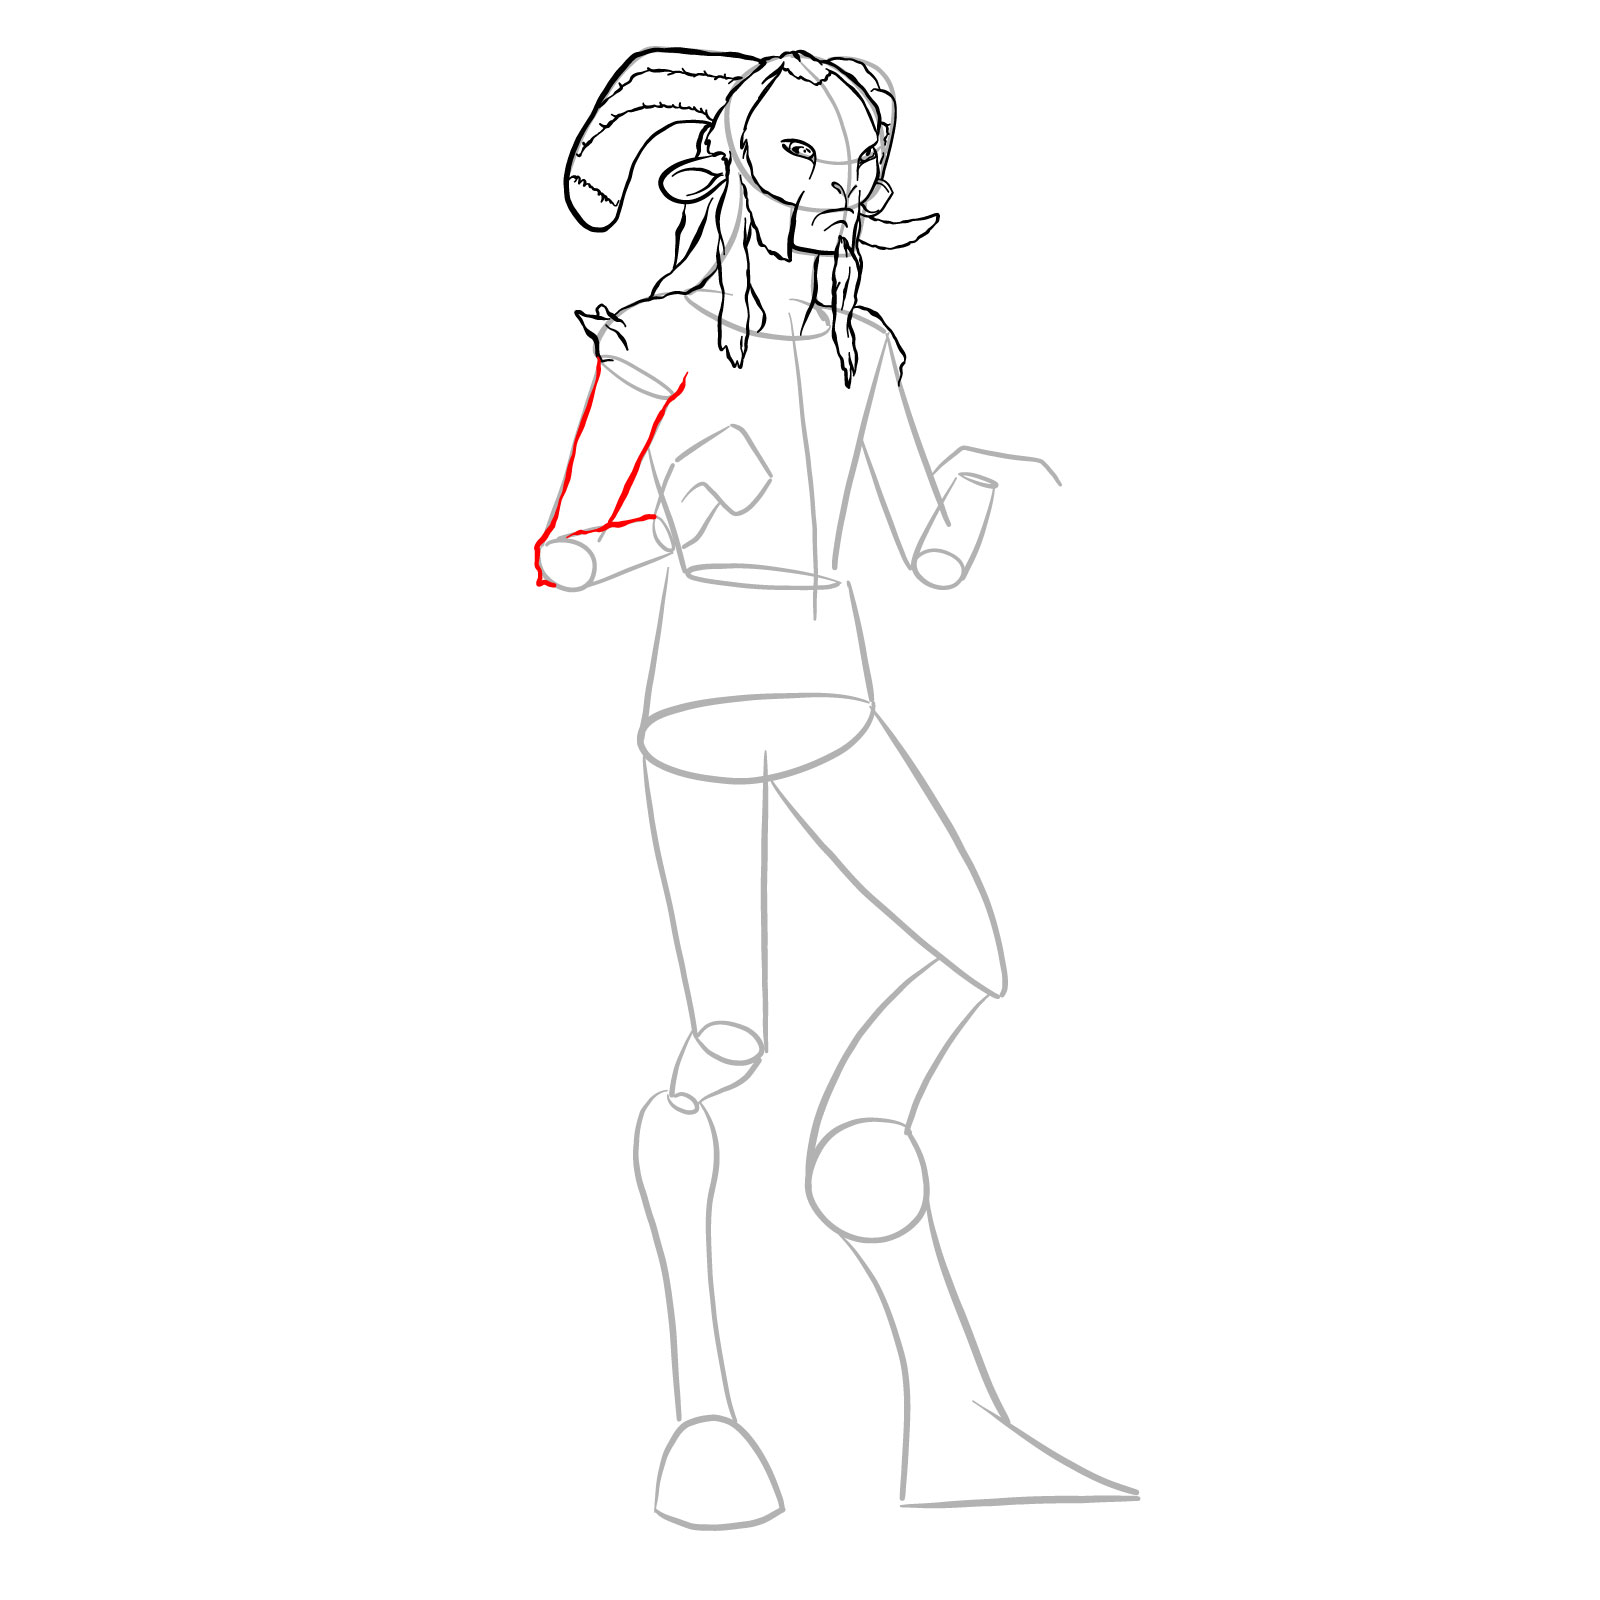 How to draw a Faun - step 16